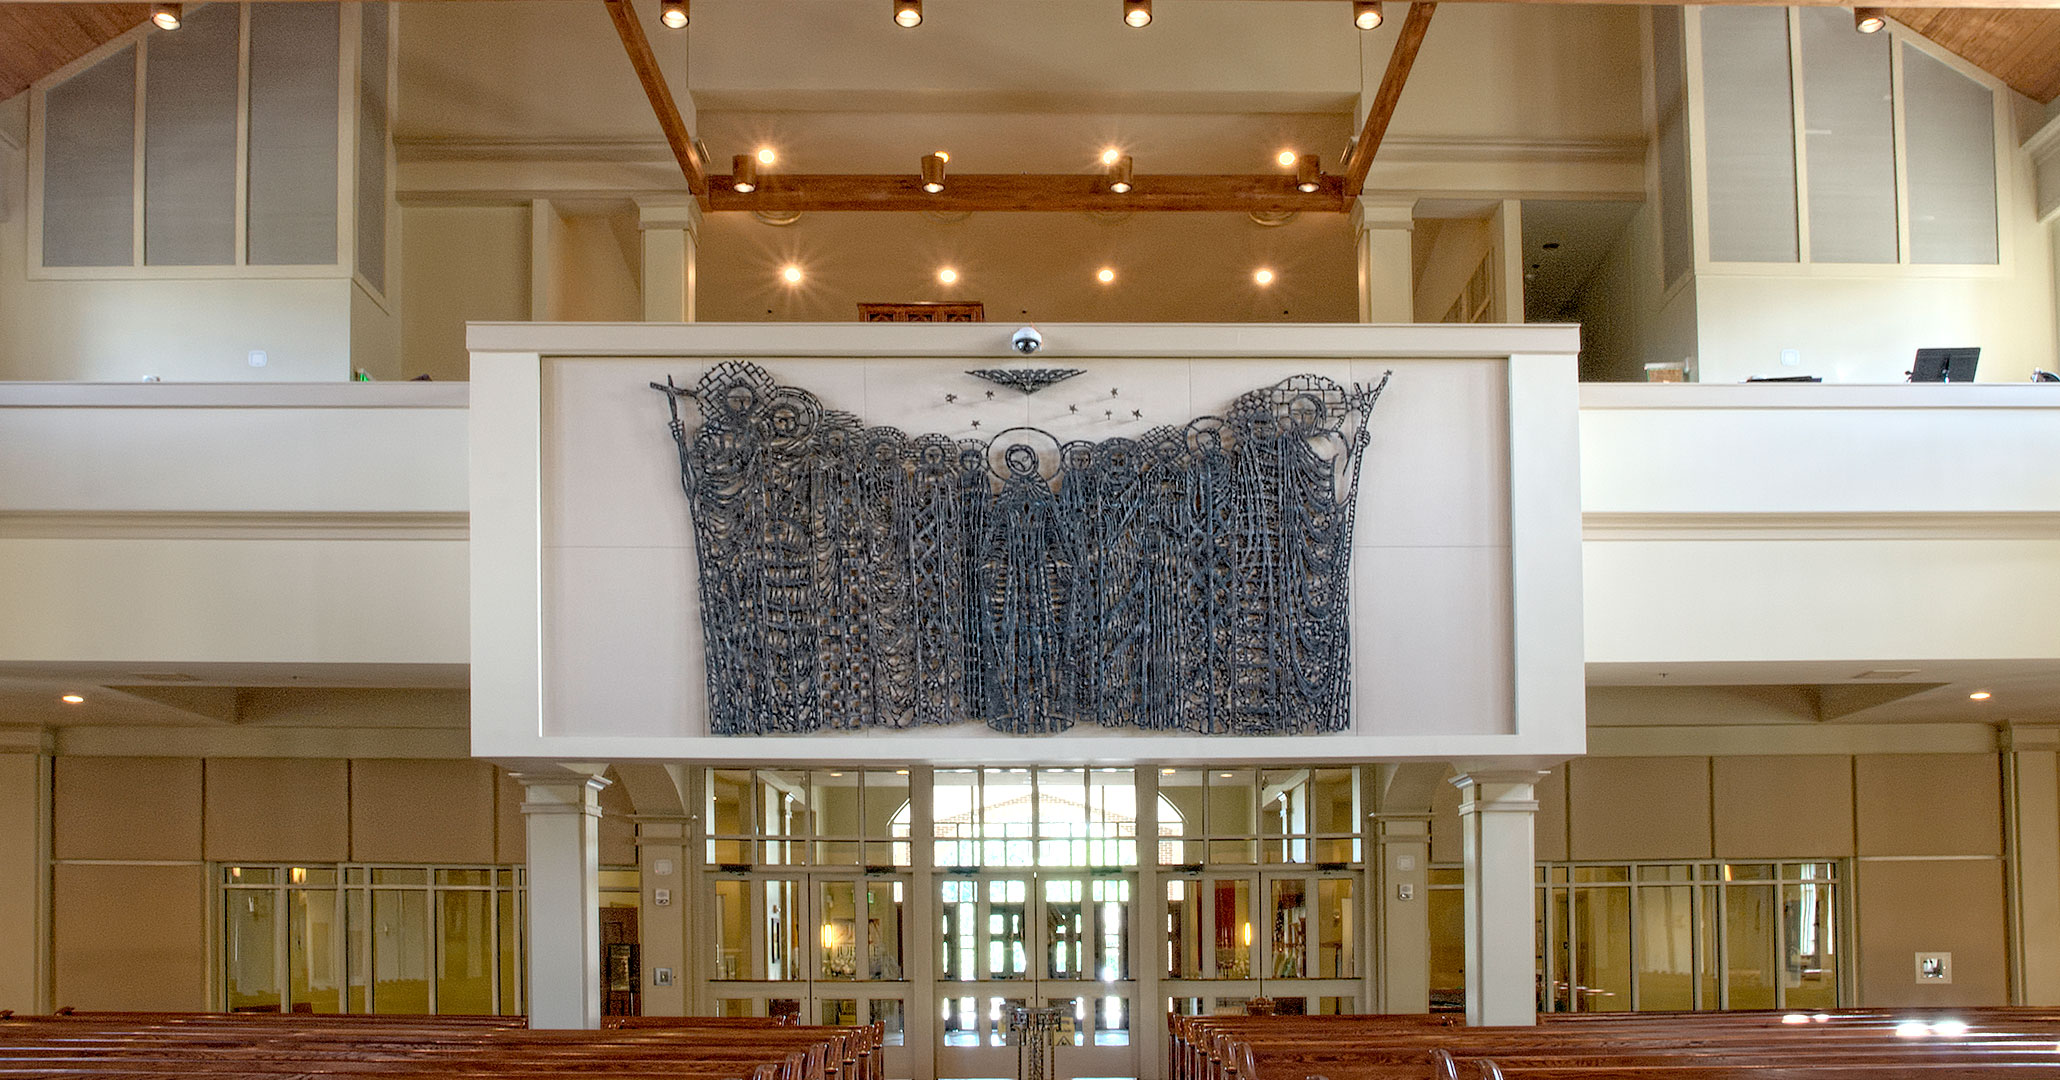 Boudreaux architects worked with St. Mark Catholic Church to incorporate religious artwork into the interior design of the building.